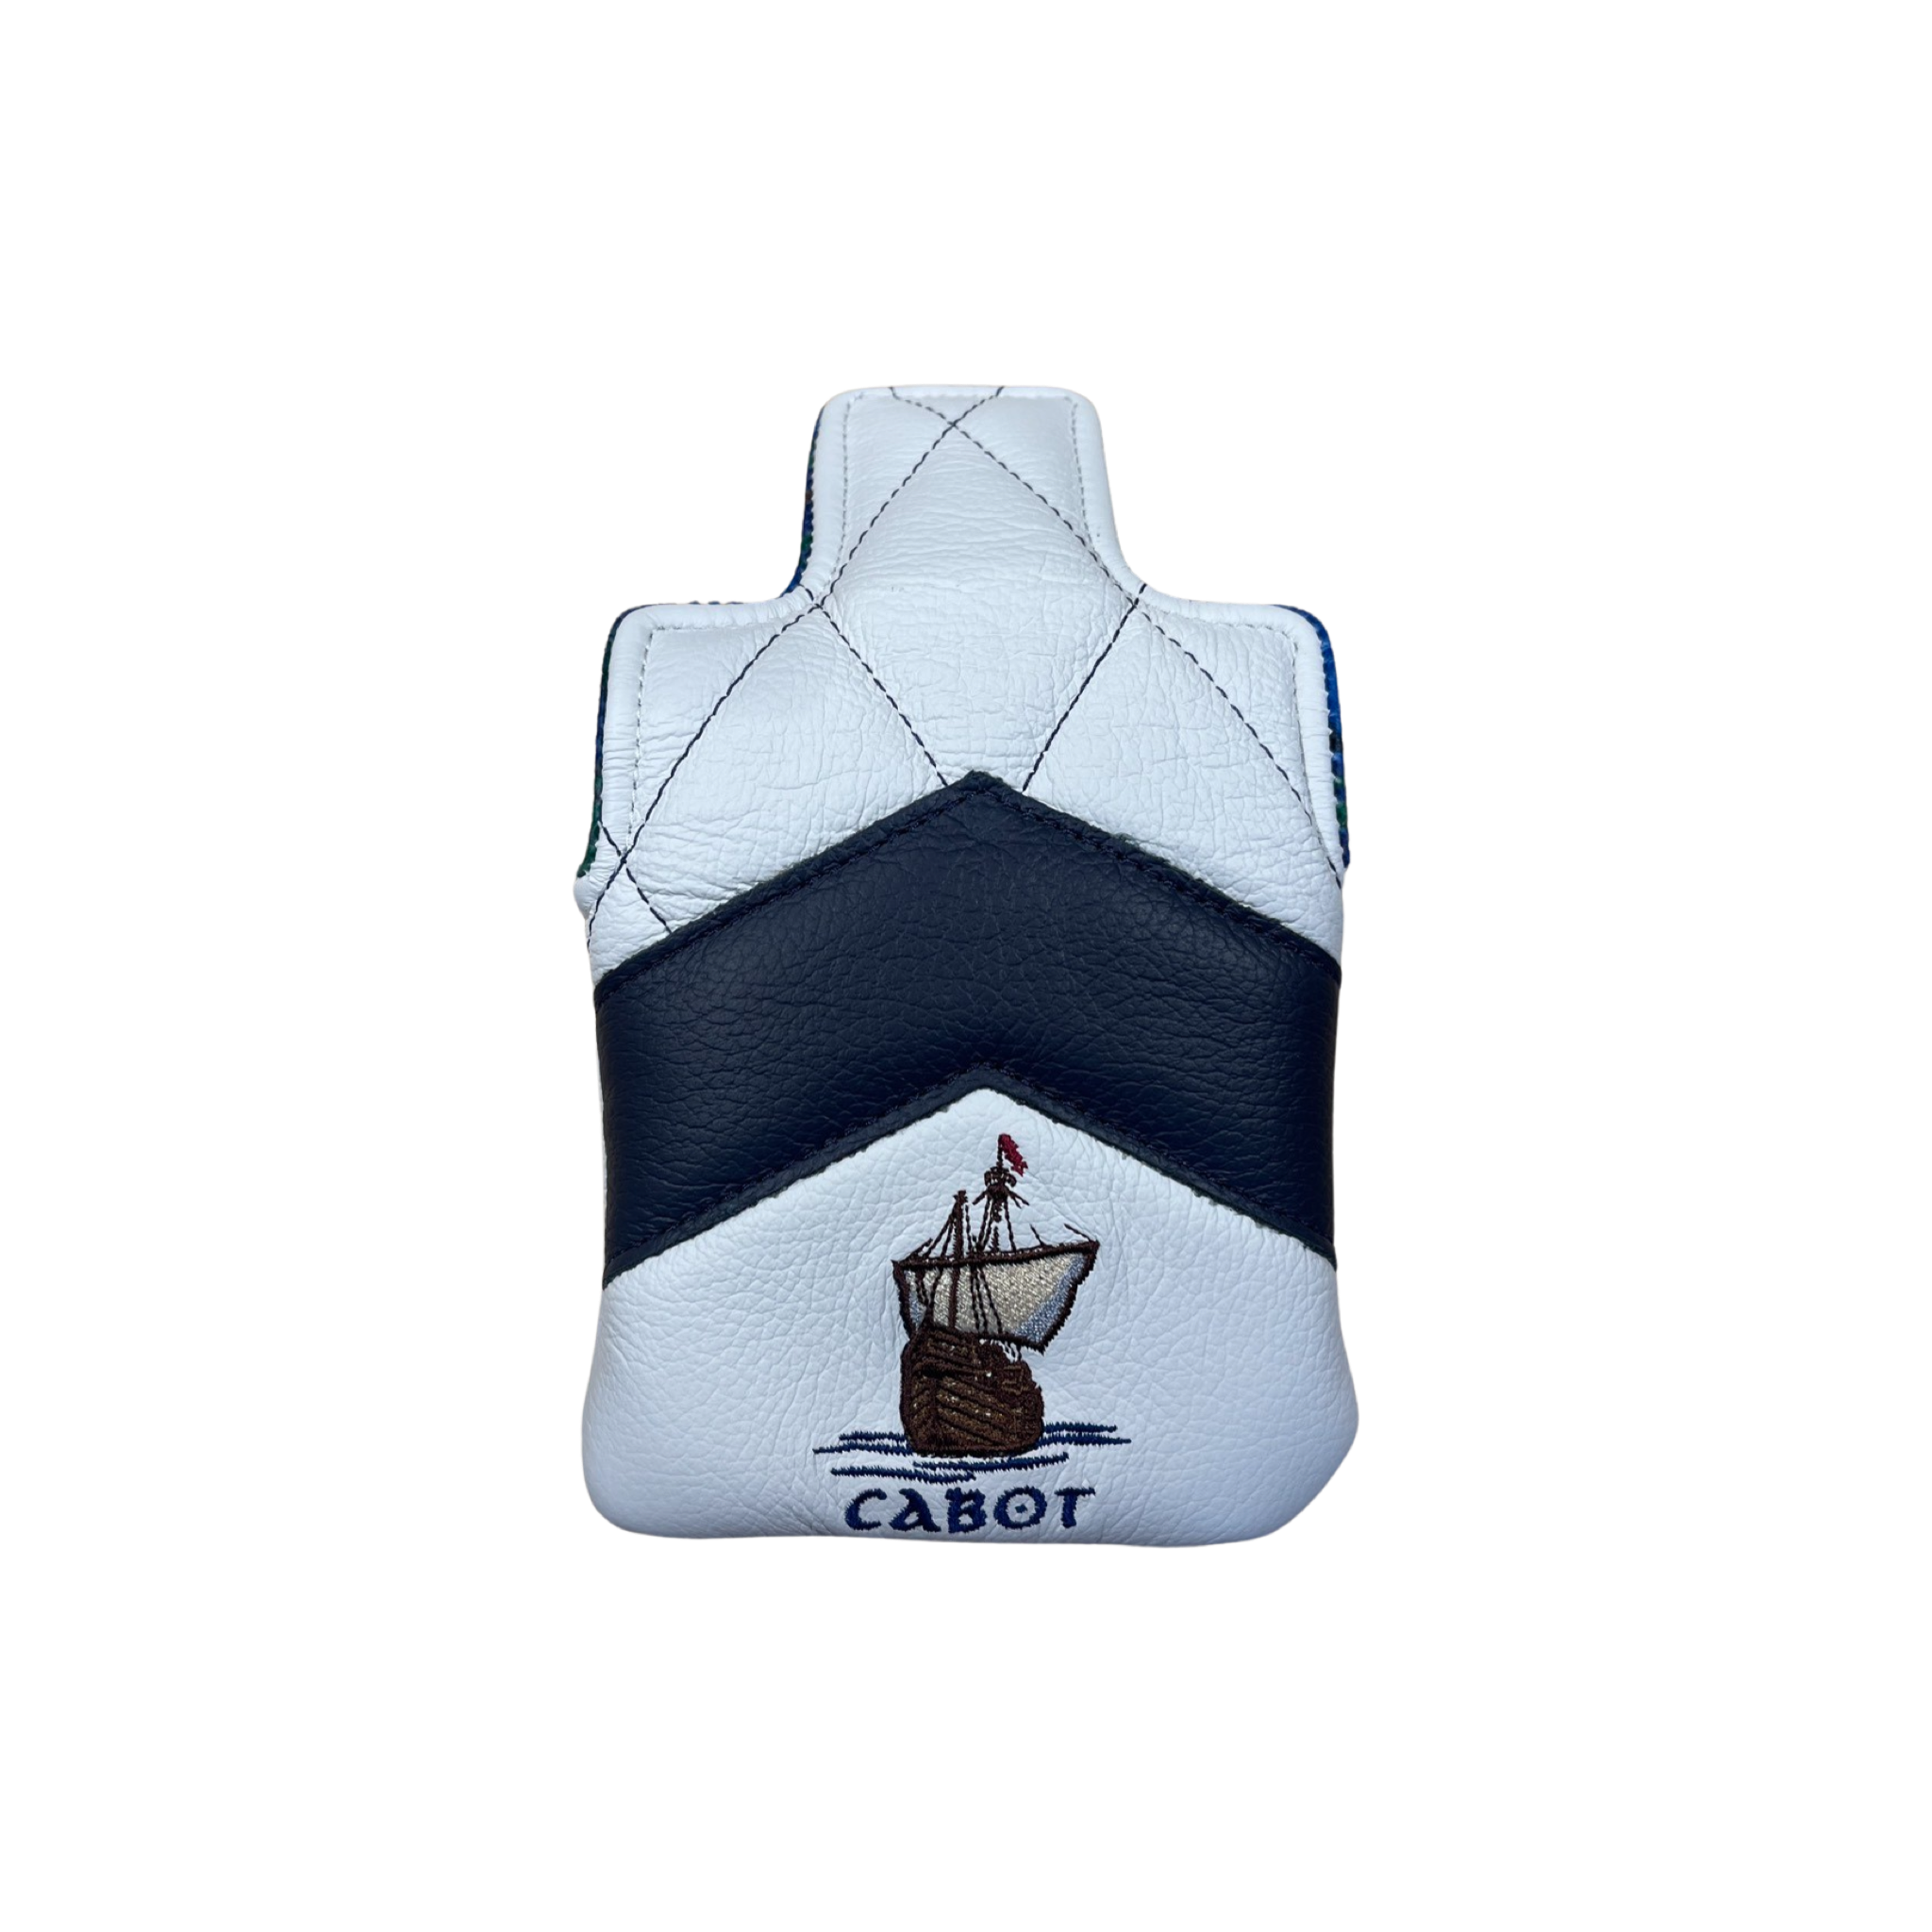 Dormie Cabot Links Double Stitch with Chevron Mallet Putter Cover